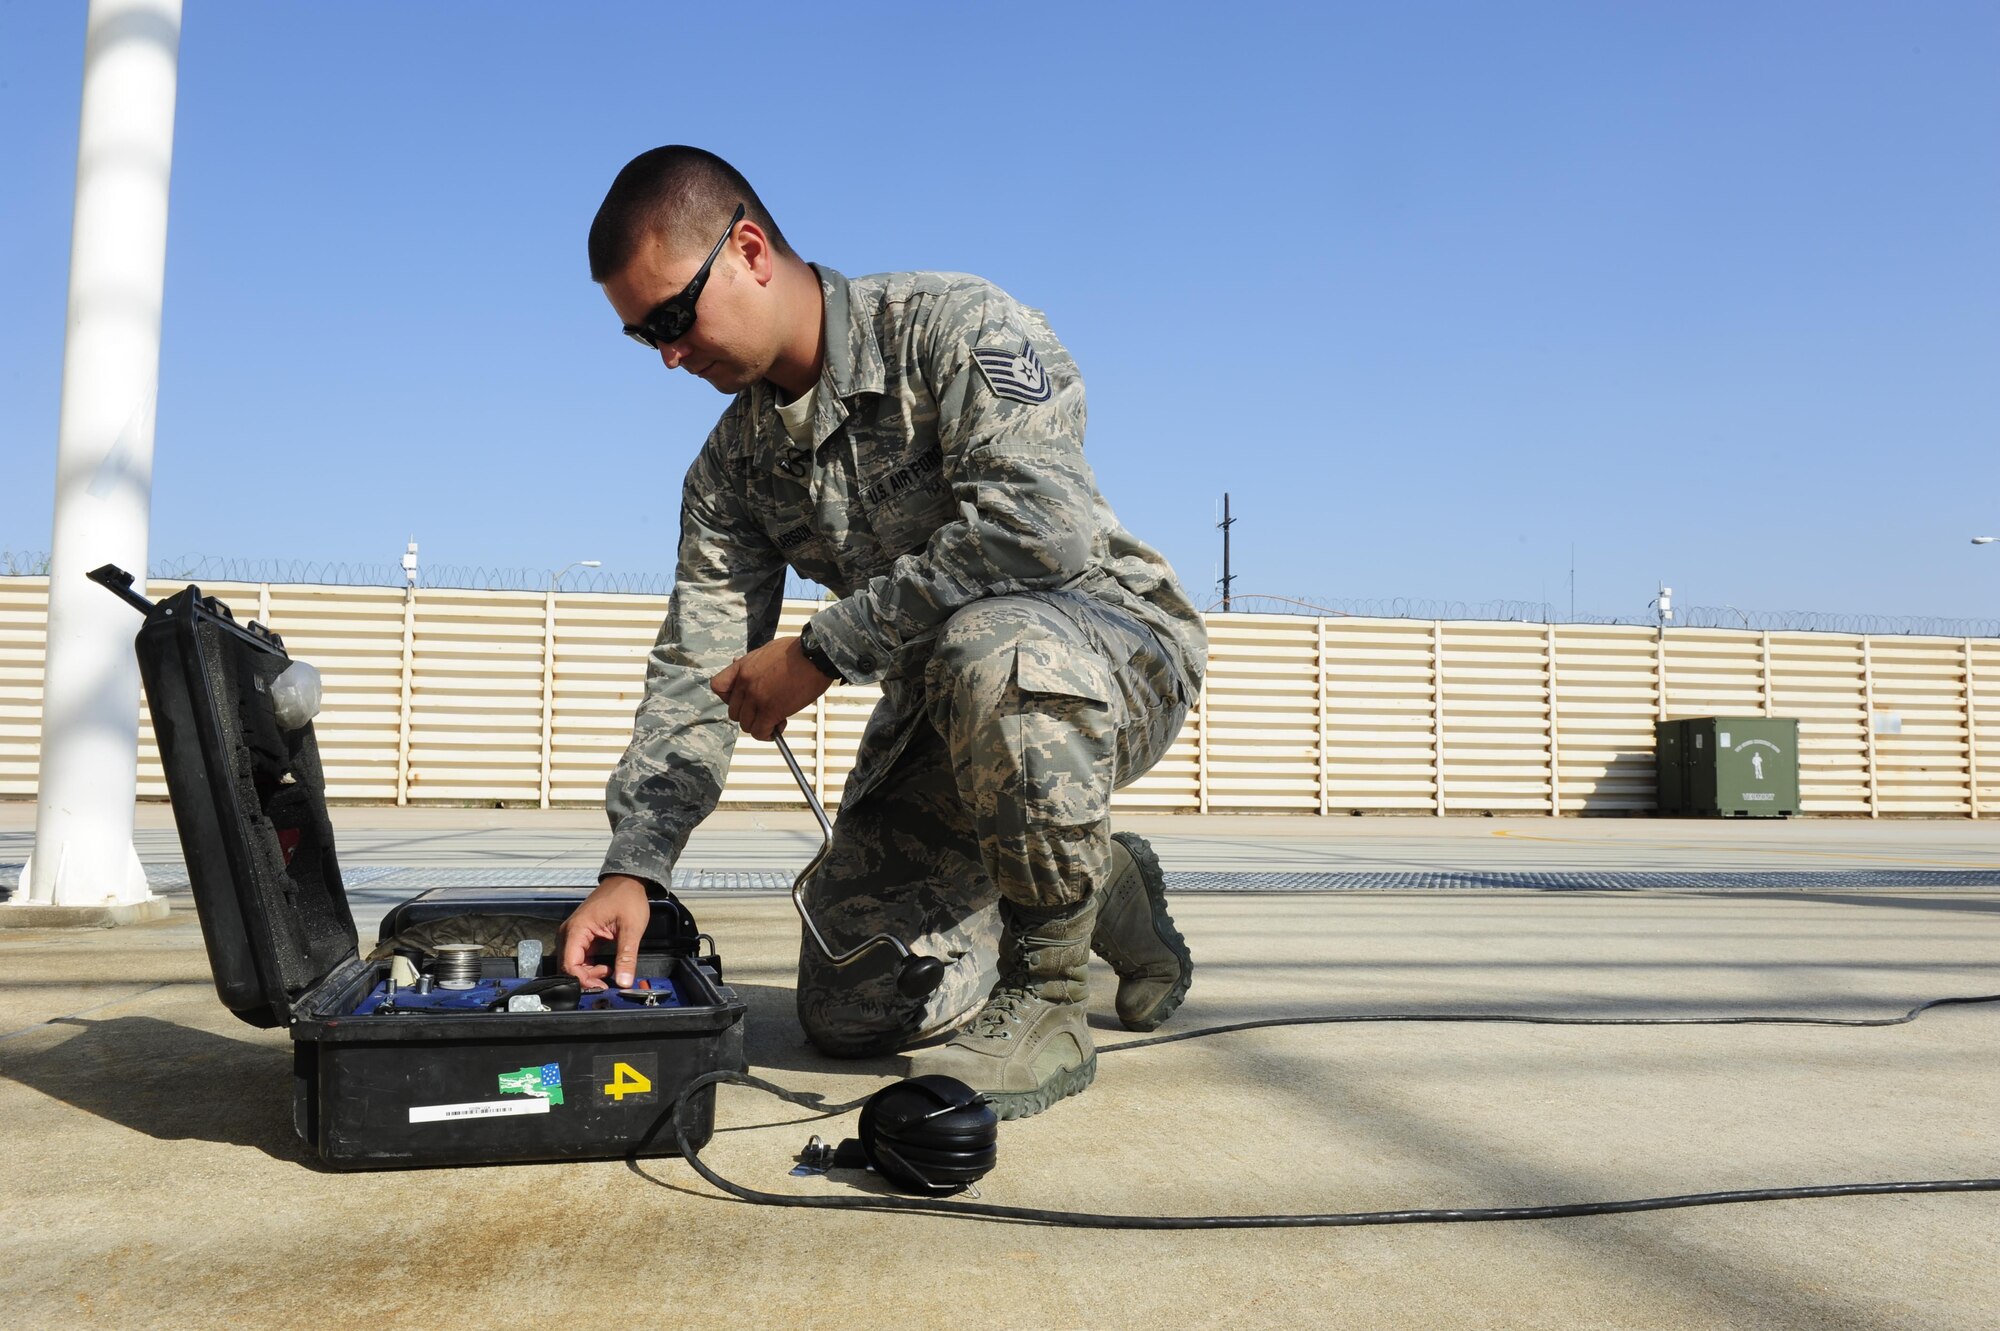 U.S. Air Force Tech. Sgt. Brett Larson, 134th Expeditionary Fighter Squadron F-16 Fighting Falcon crew chief, Vermont Air National Guard, retrieves a tool from his toolbox at Kunsan Air Base, Republic of Korea, Oct. 6, 2015. The 134th EFS was redeployed from Kadena Air Base, Japan to Kunsan AB as part of a theater security package. In an effort to underscore the U.S. commitment to regional security and stability, the 134th Expeditionary Fighter Squadron deployed to Kunsan as part of a rotational theater security package. (U.S. Air Force photo by Staff Sgt. Nick Wilson/Released) 
